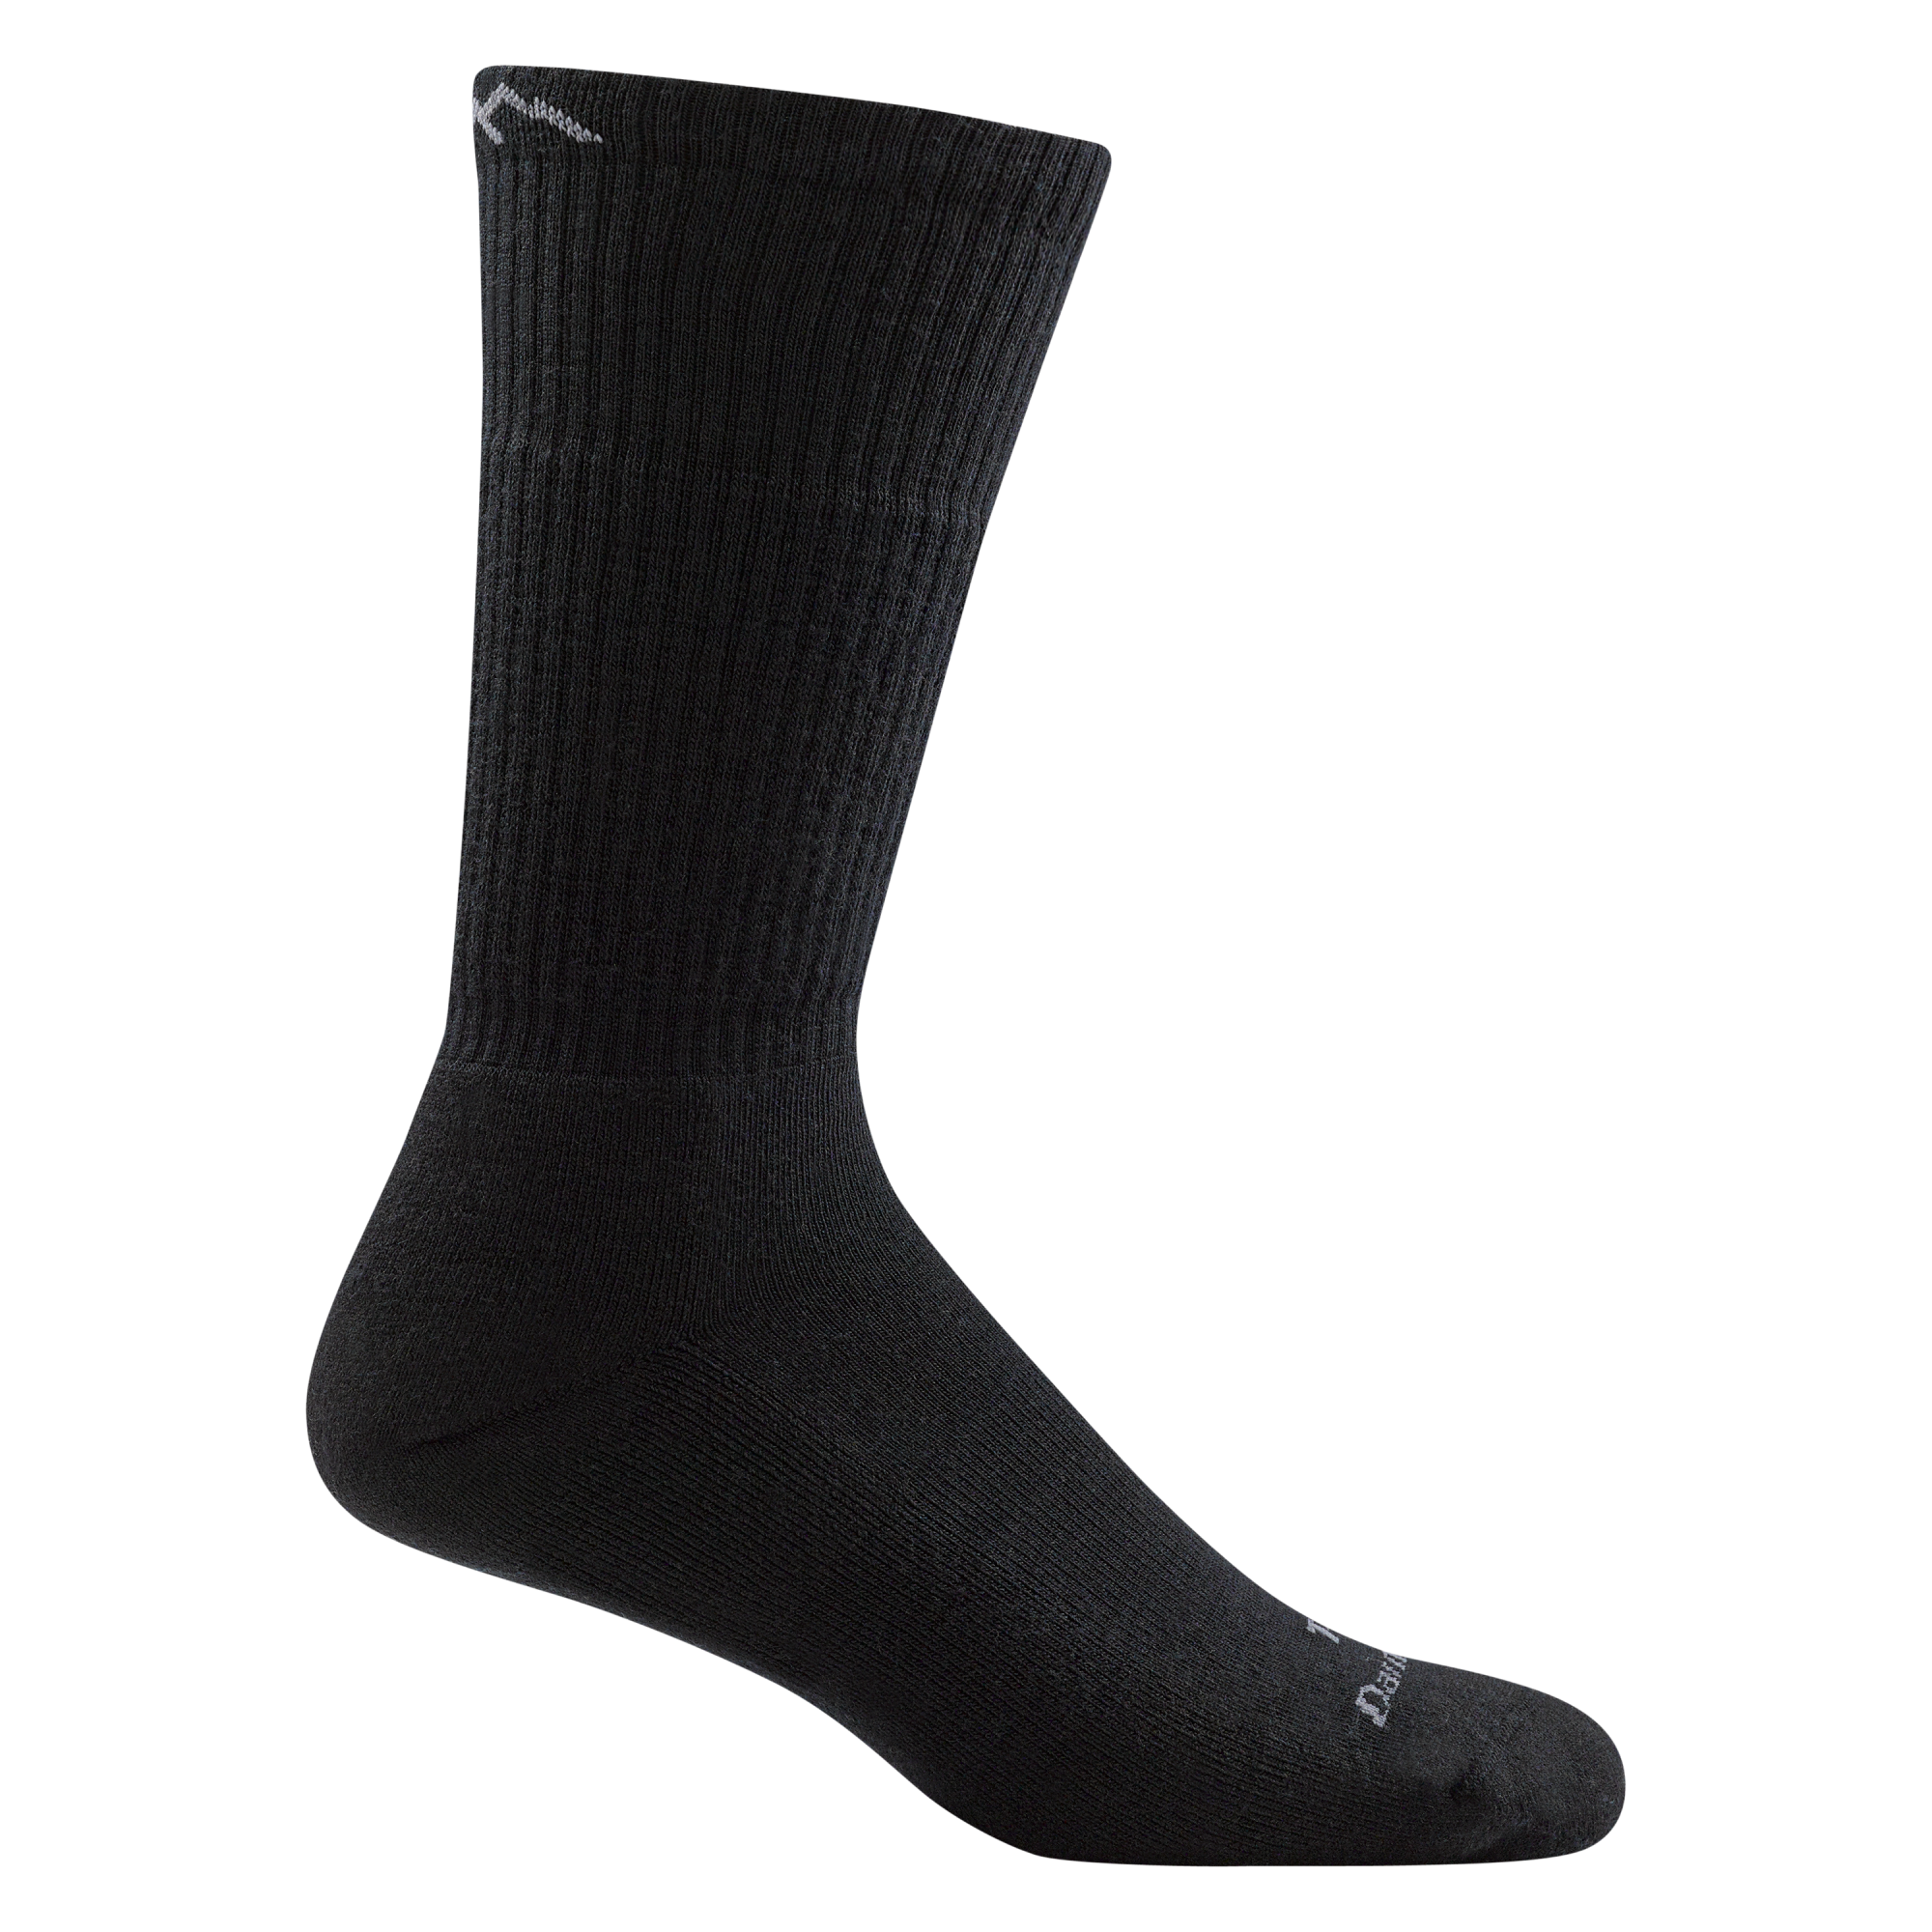 T4021 unisex boot midweight tactical sock in color black with white darn tough signature on forefoot